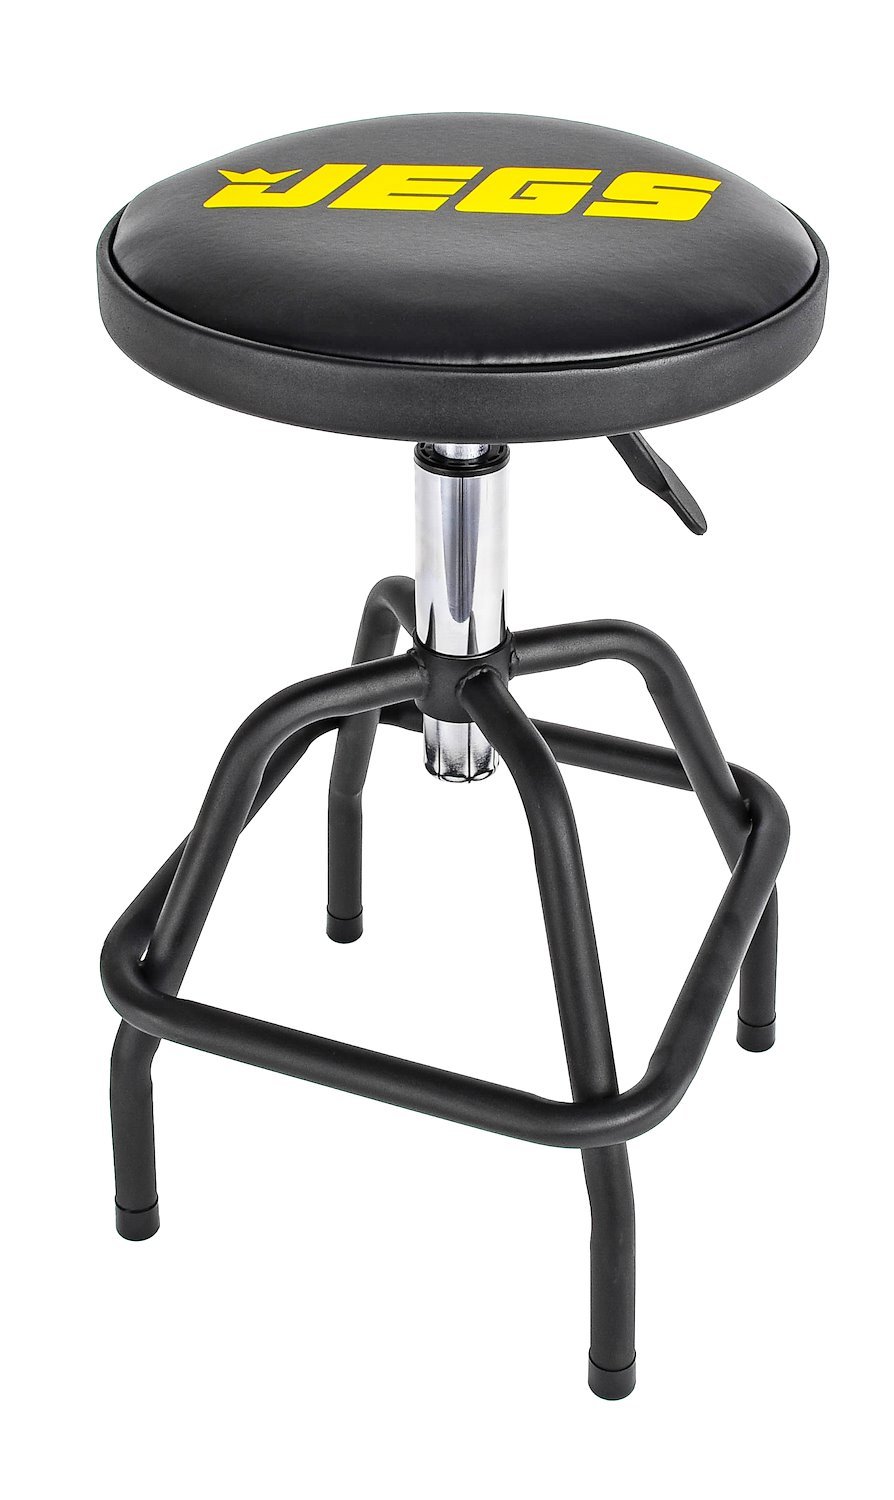 Shop Stool with Swivel Seat [Adjustable, 300 lb.